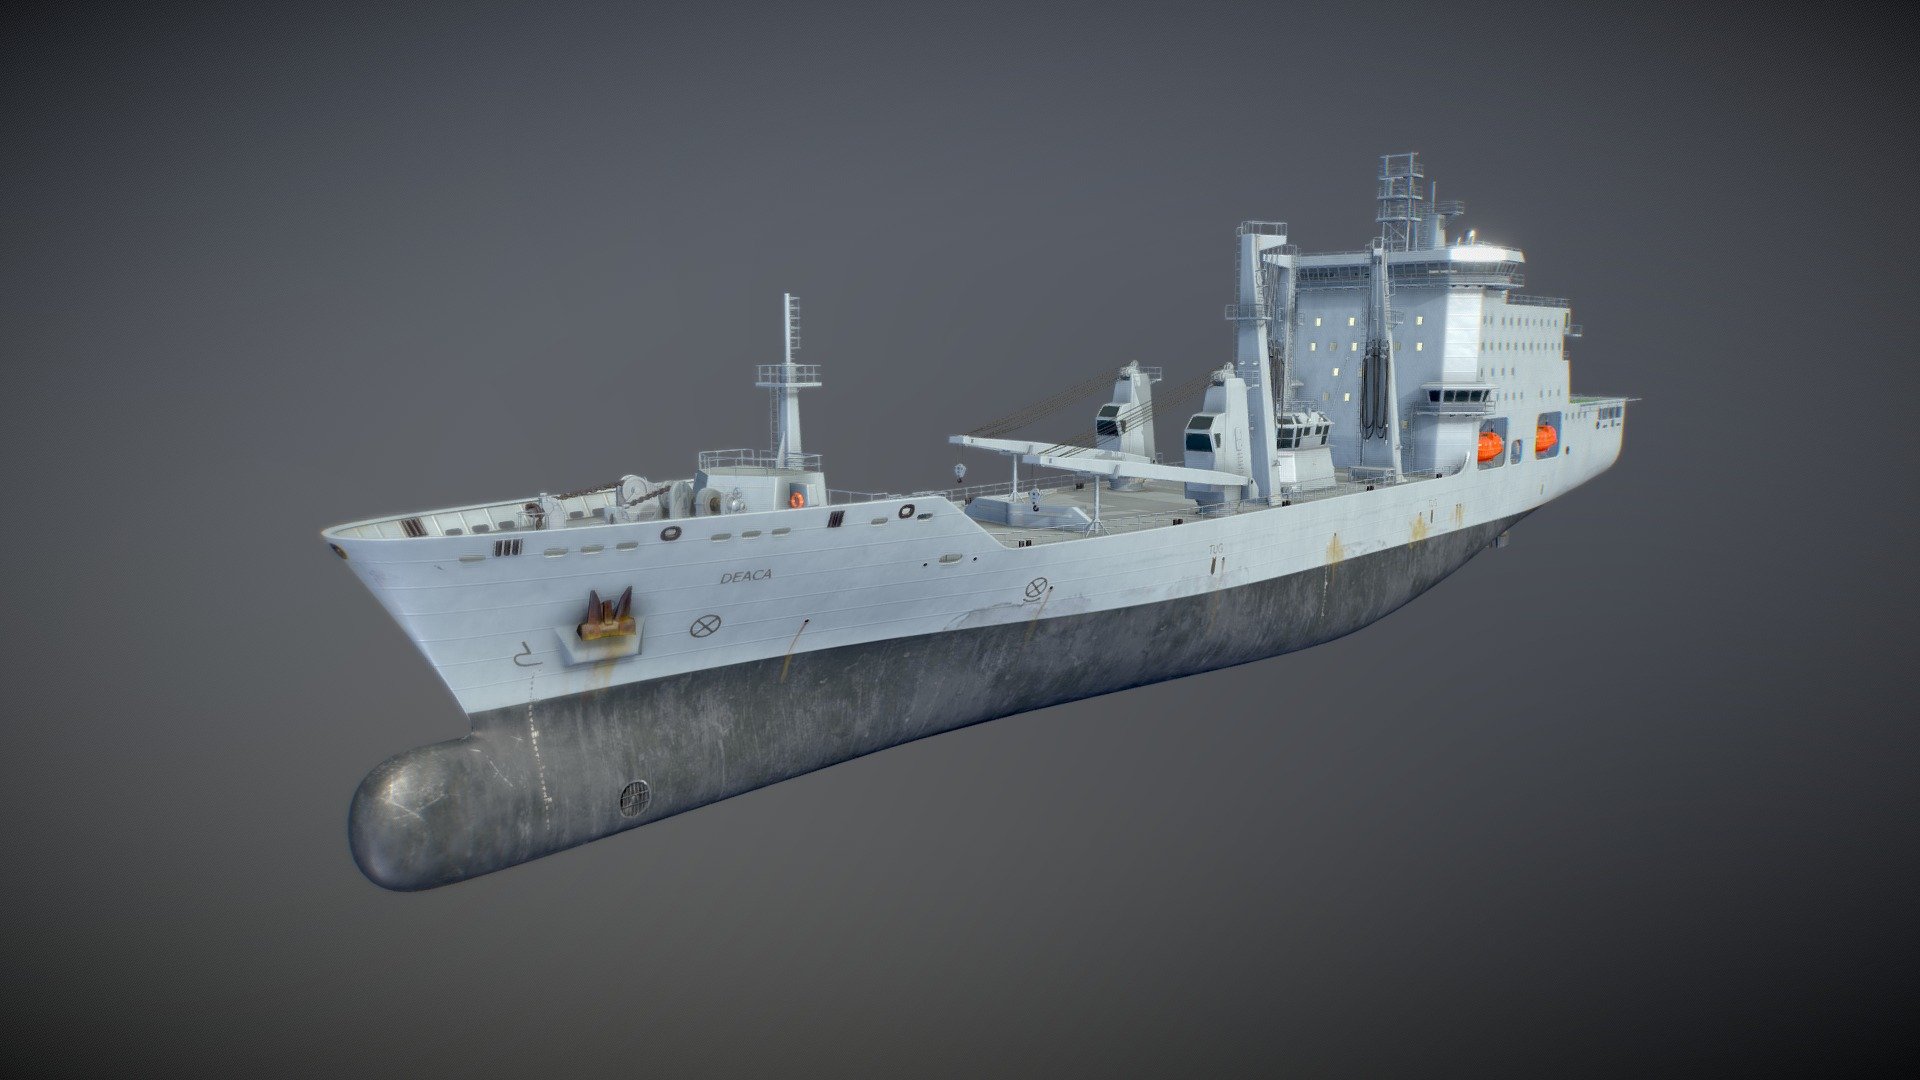 What's On Steam - Axan Ships - Low Poly